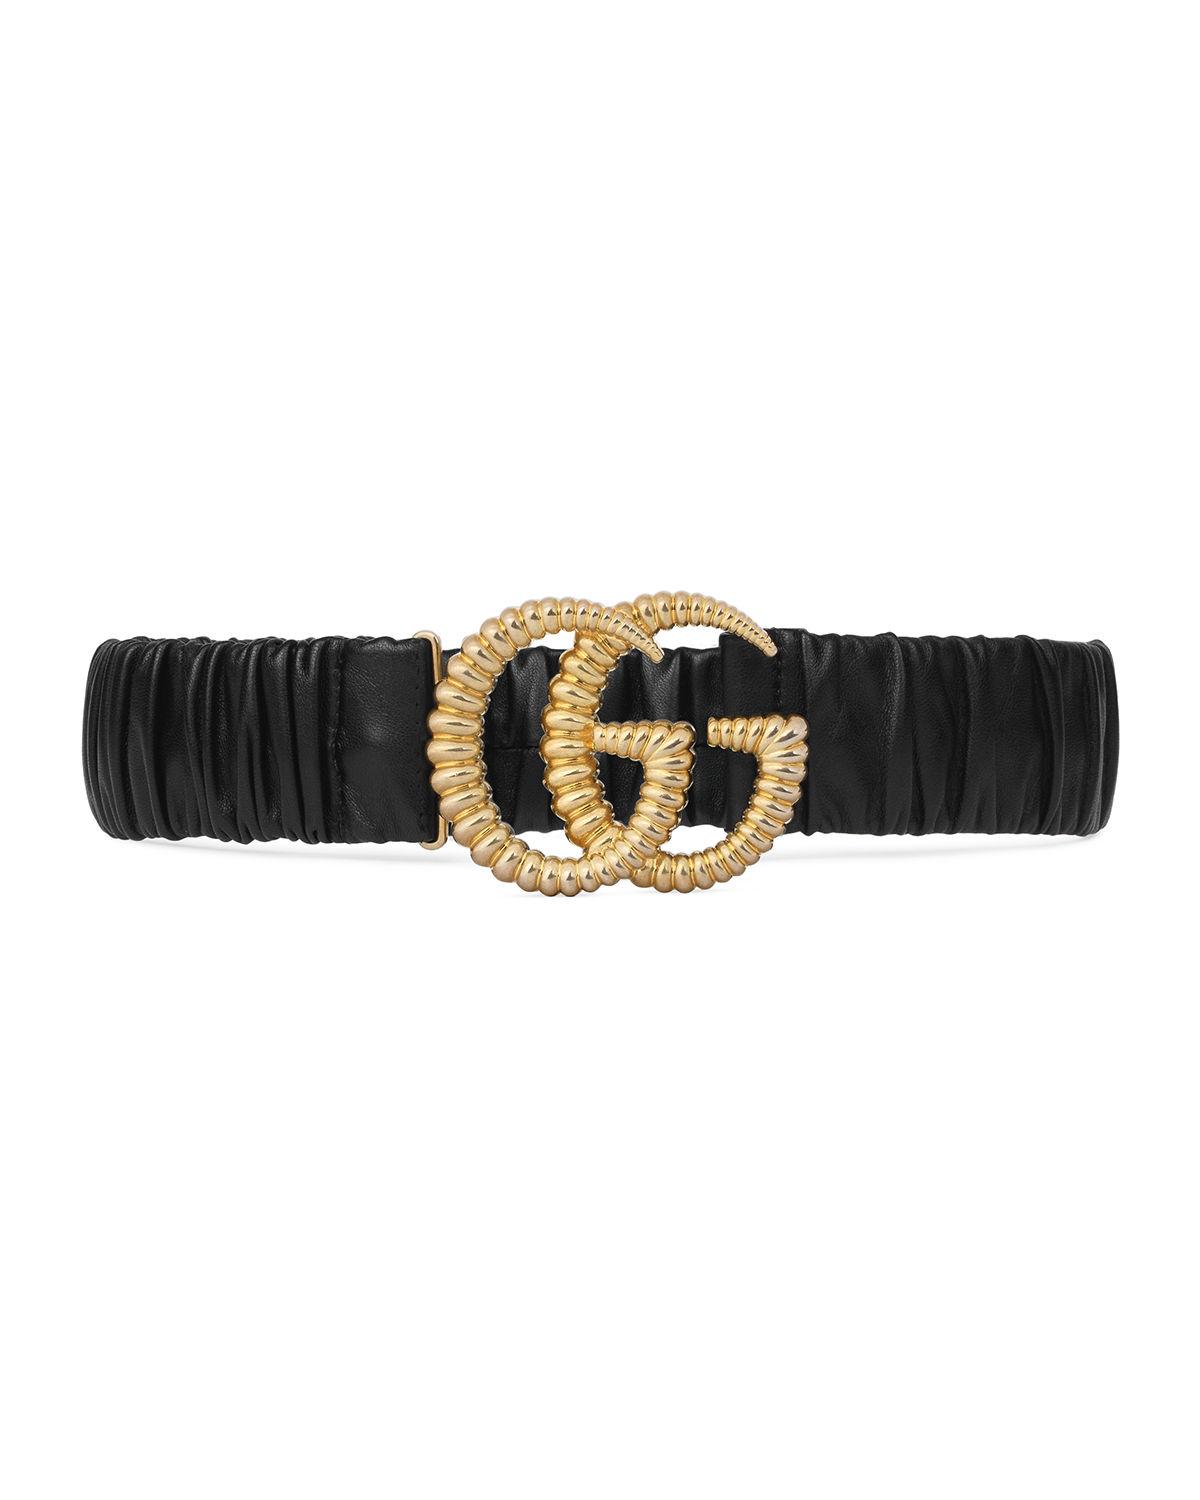 Gucci Elasticized Leather Belt W/ Torchon Double G Buckle in Black | Lyst